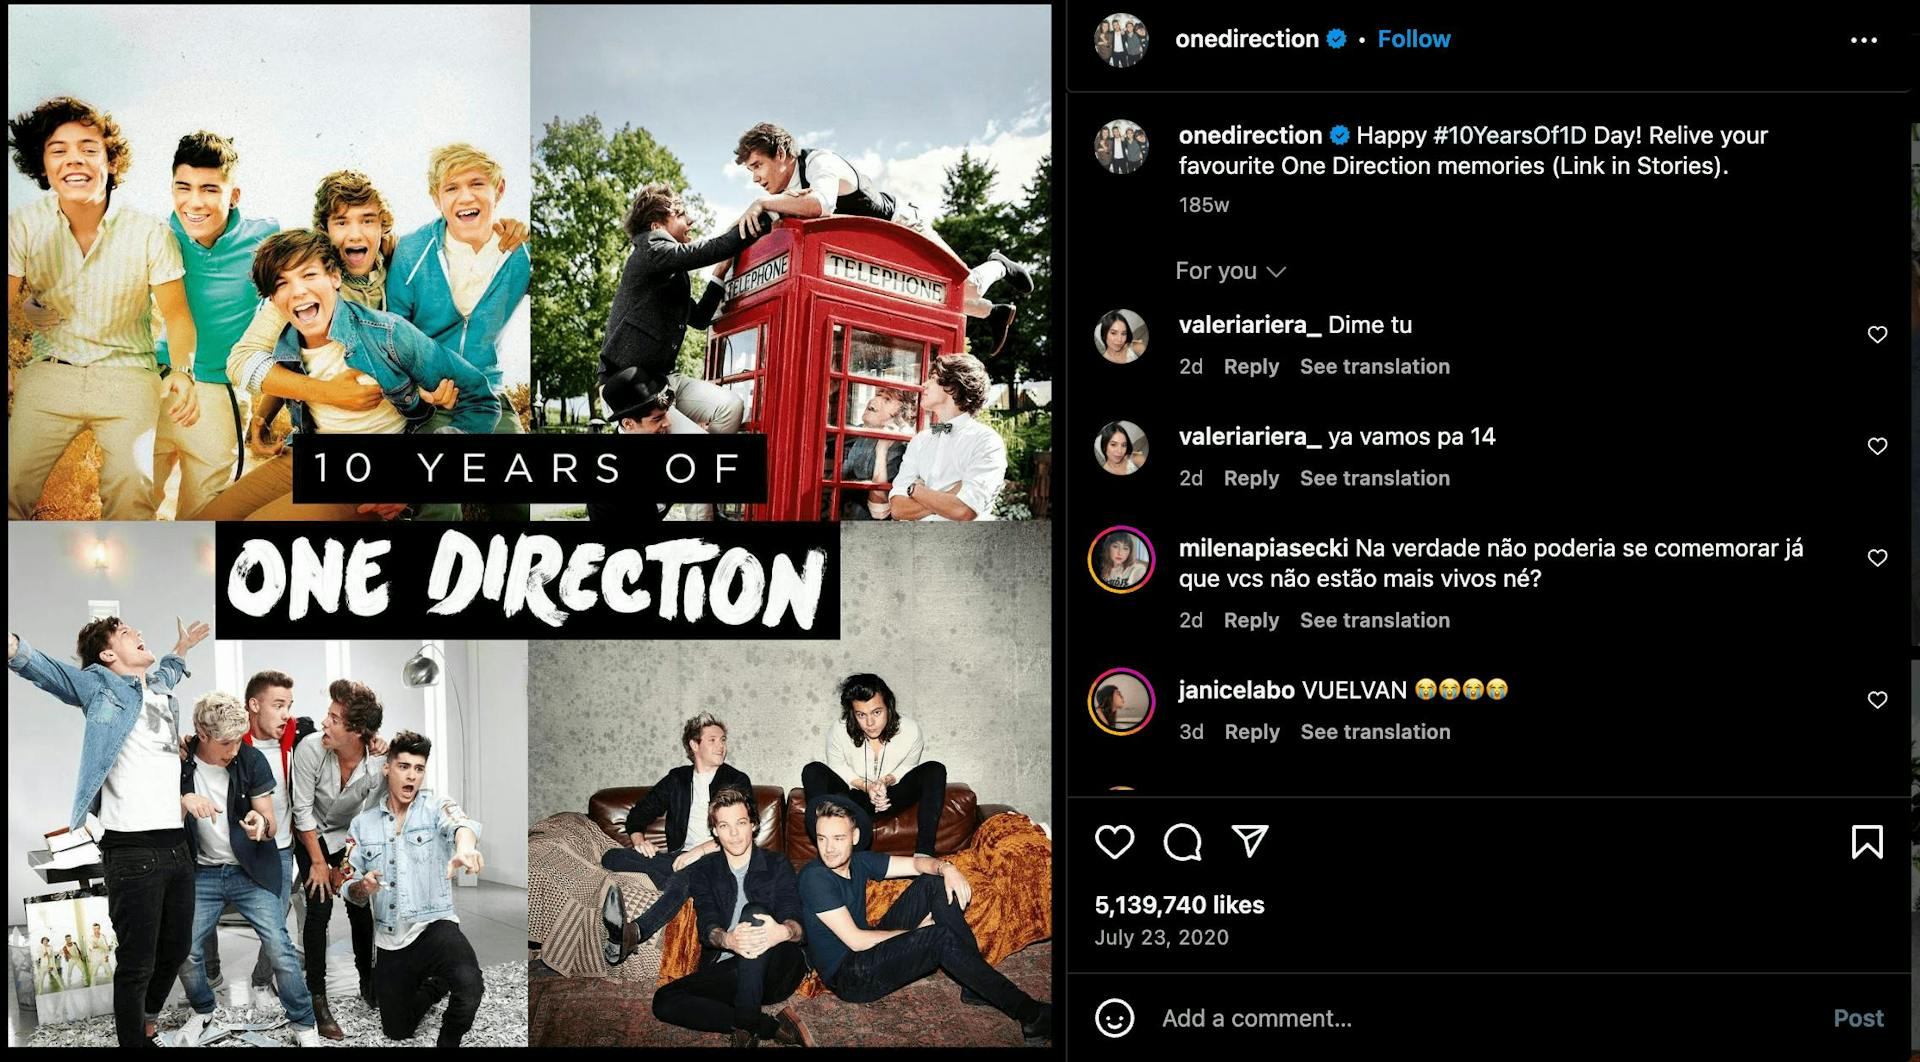 One Direction 10 year anniversary Instagram post in our blog with the top UK influencers